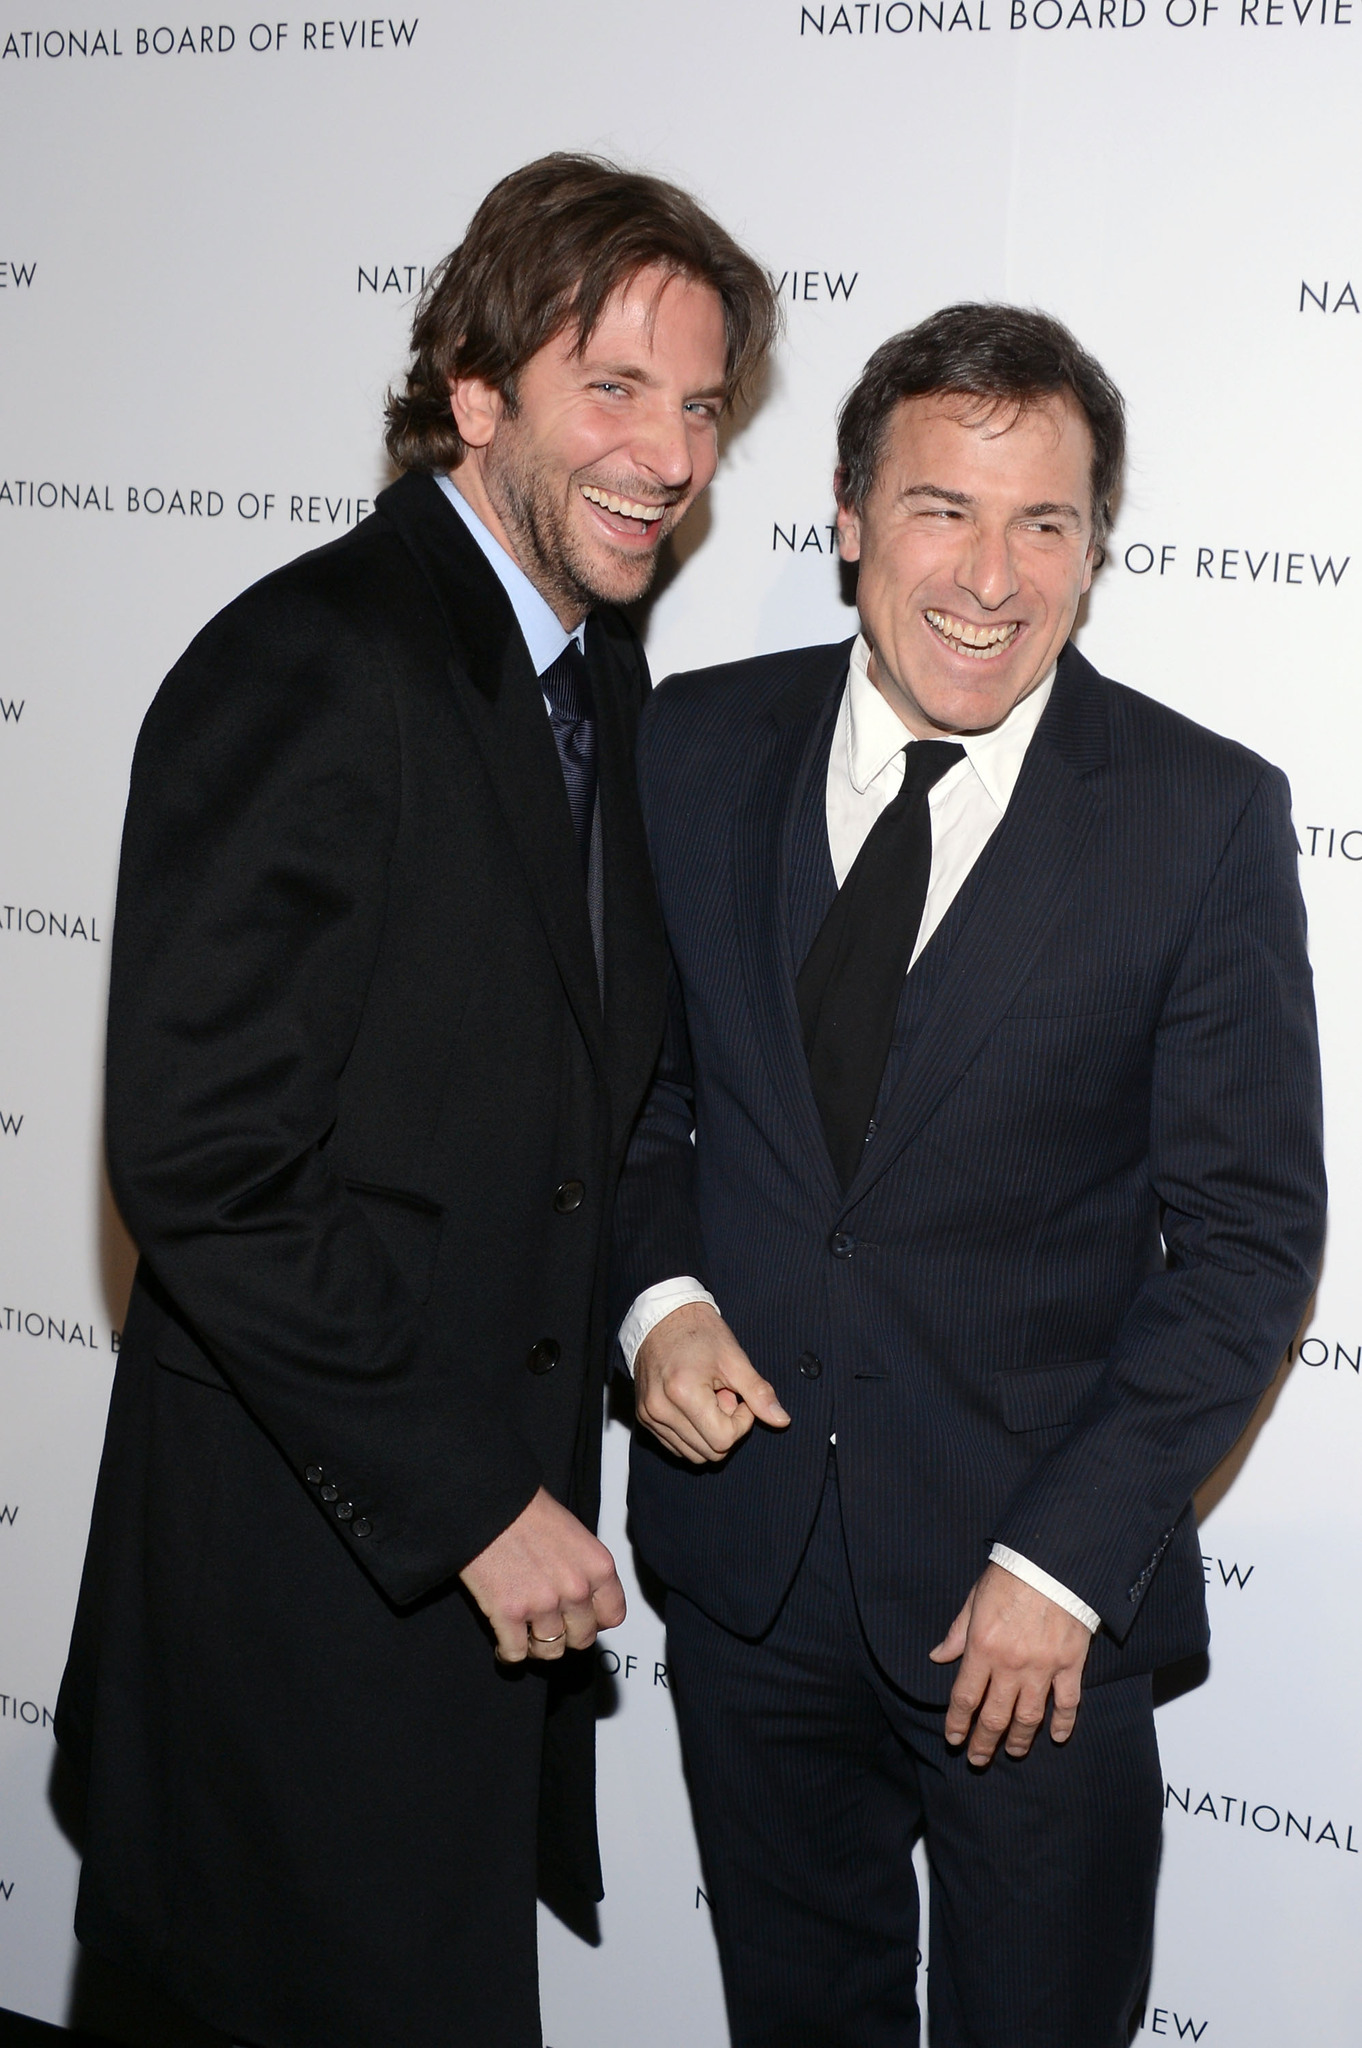 Bradley Cooper and David O. Russell